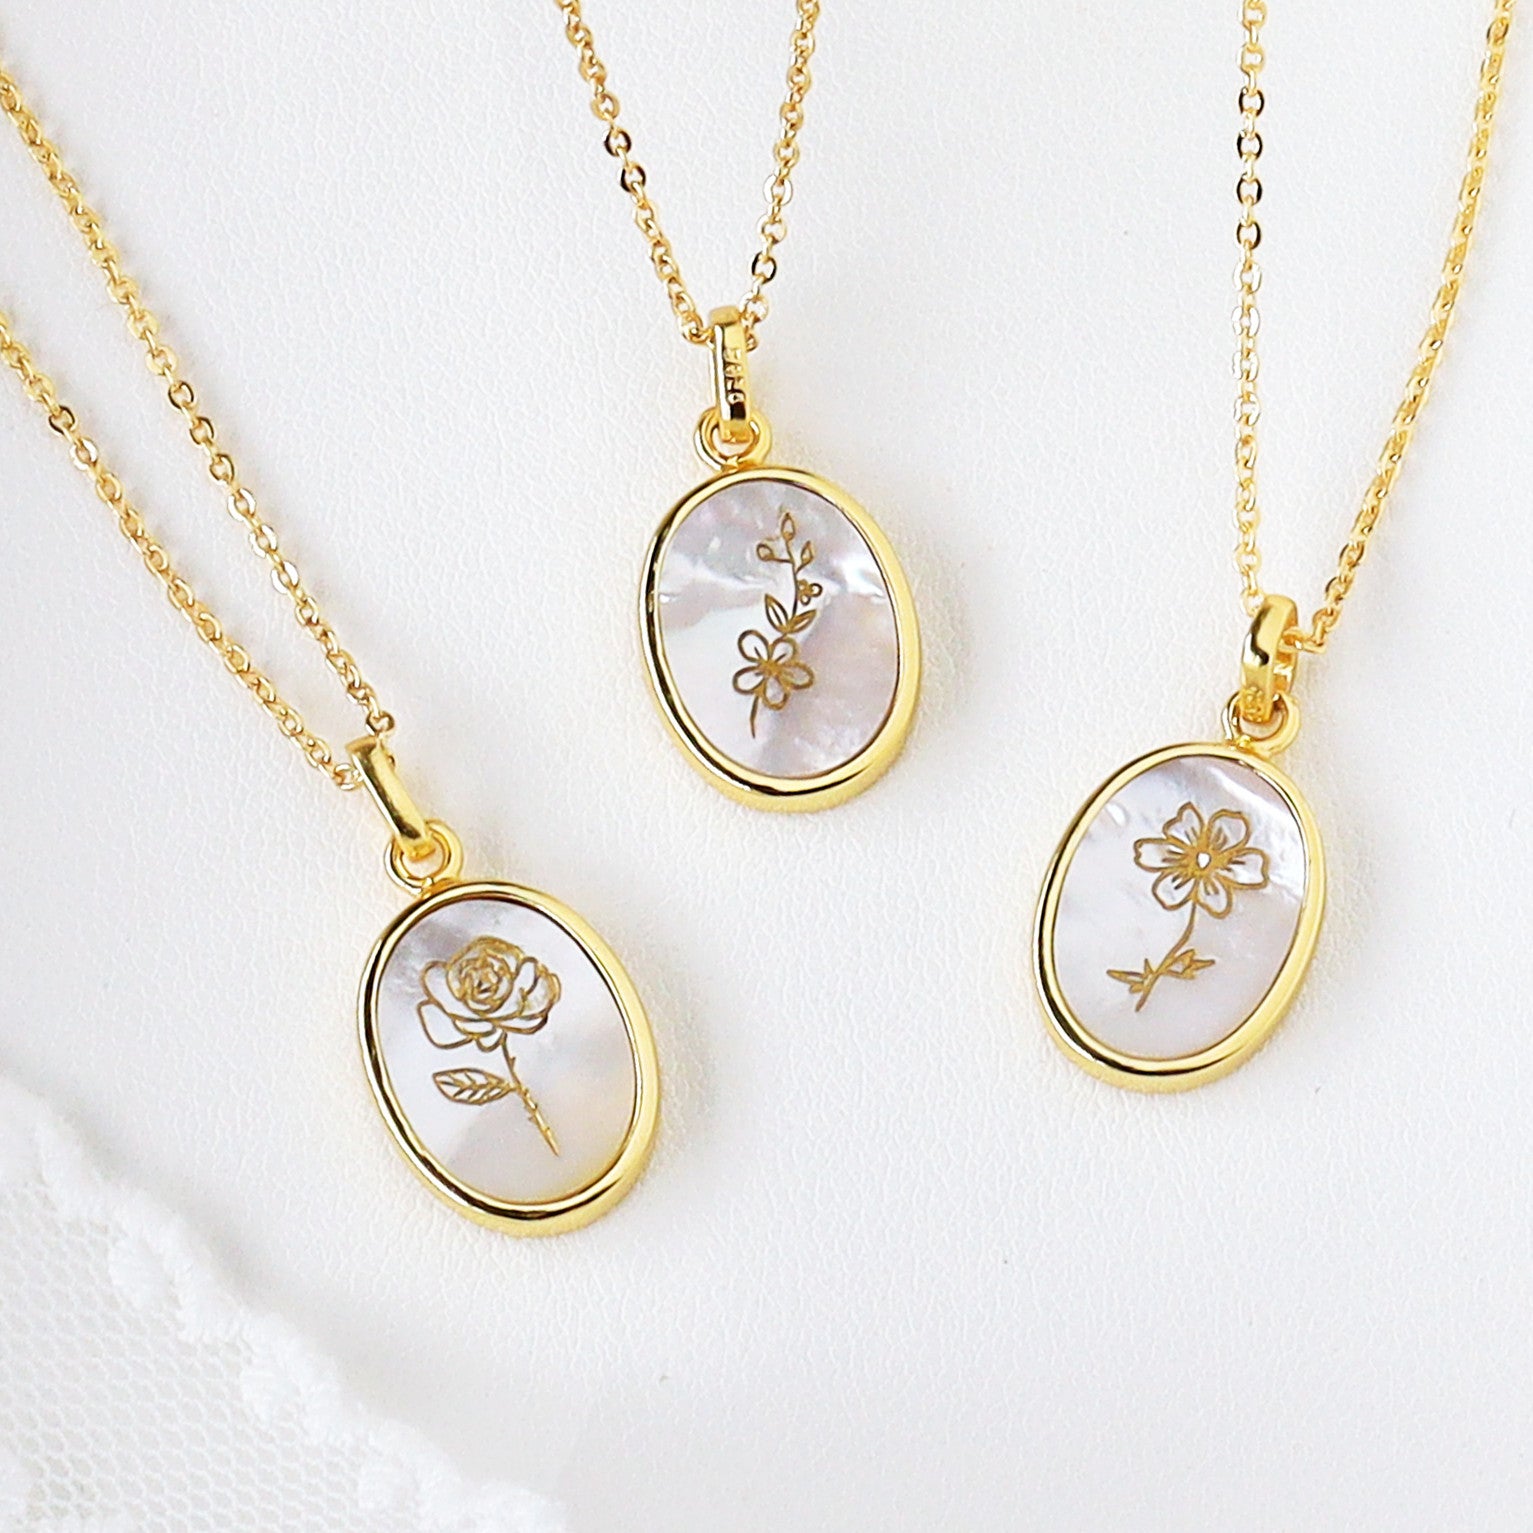 Gold Oval White Shell Birth Month Flower Pendant Necklace, Personalization Jewelry KZ027